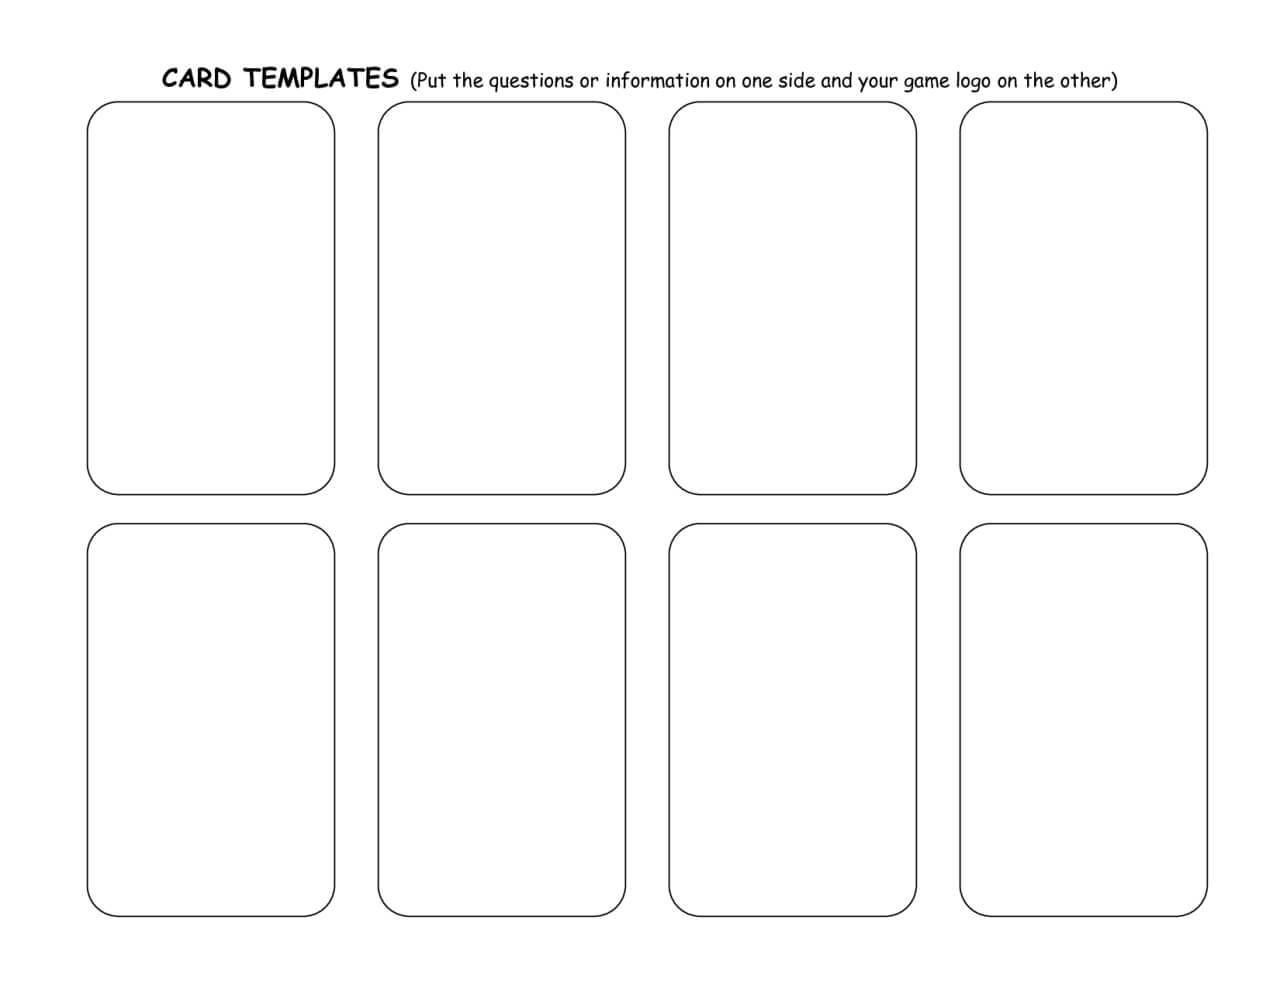 Trading Card Game Template - Free Download In 2019 | Trading With Trading Card Template Word